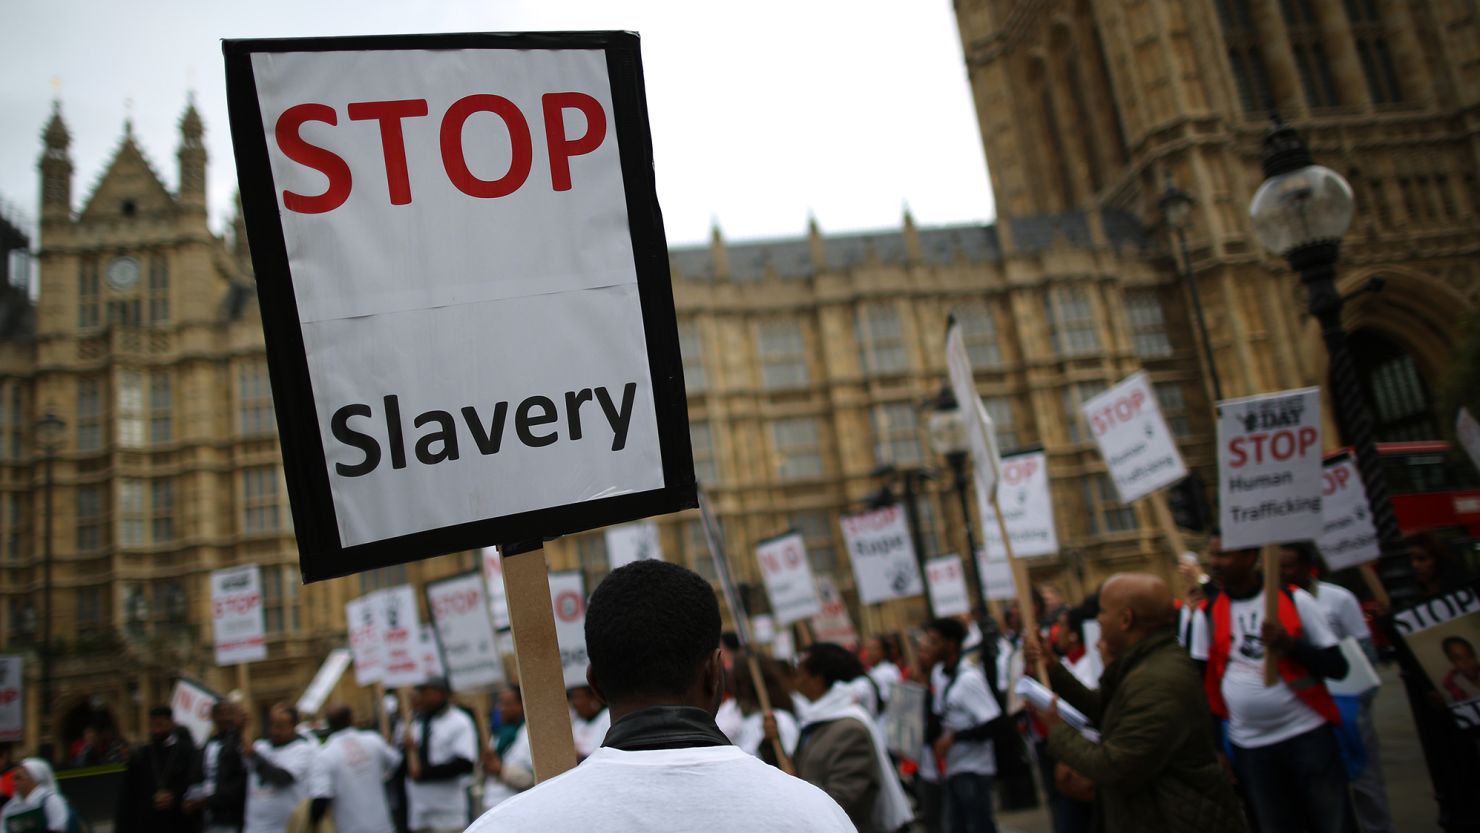  Anti-slavery activists rally outside Parliament on October 18, 2013, in London, England. 